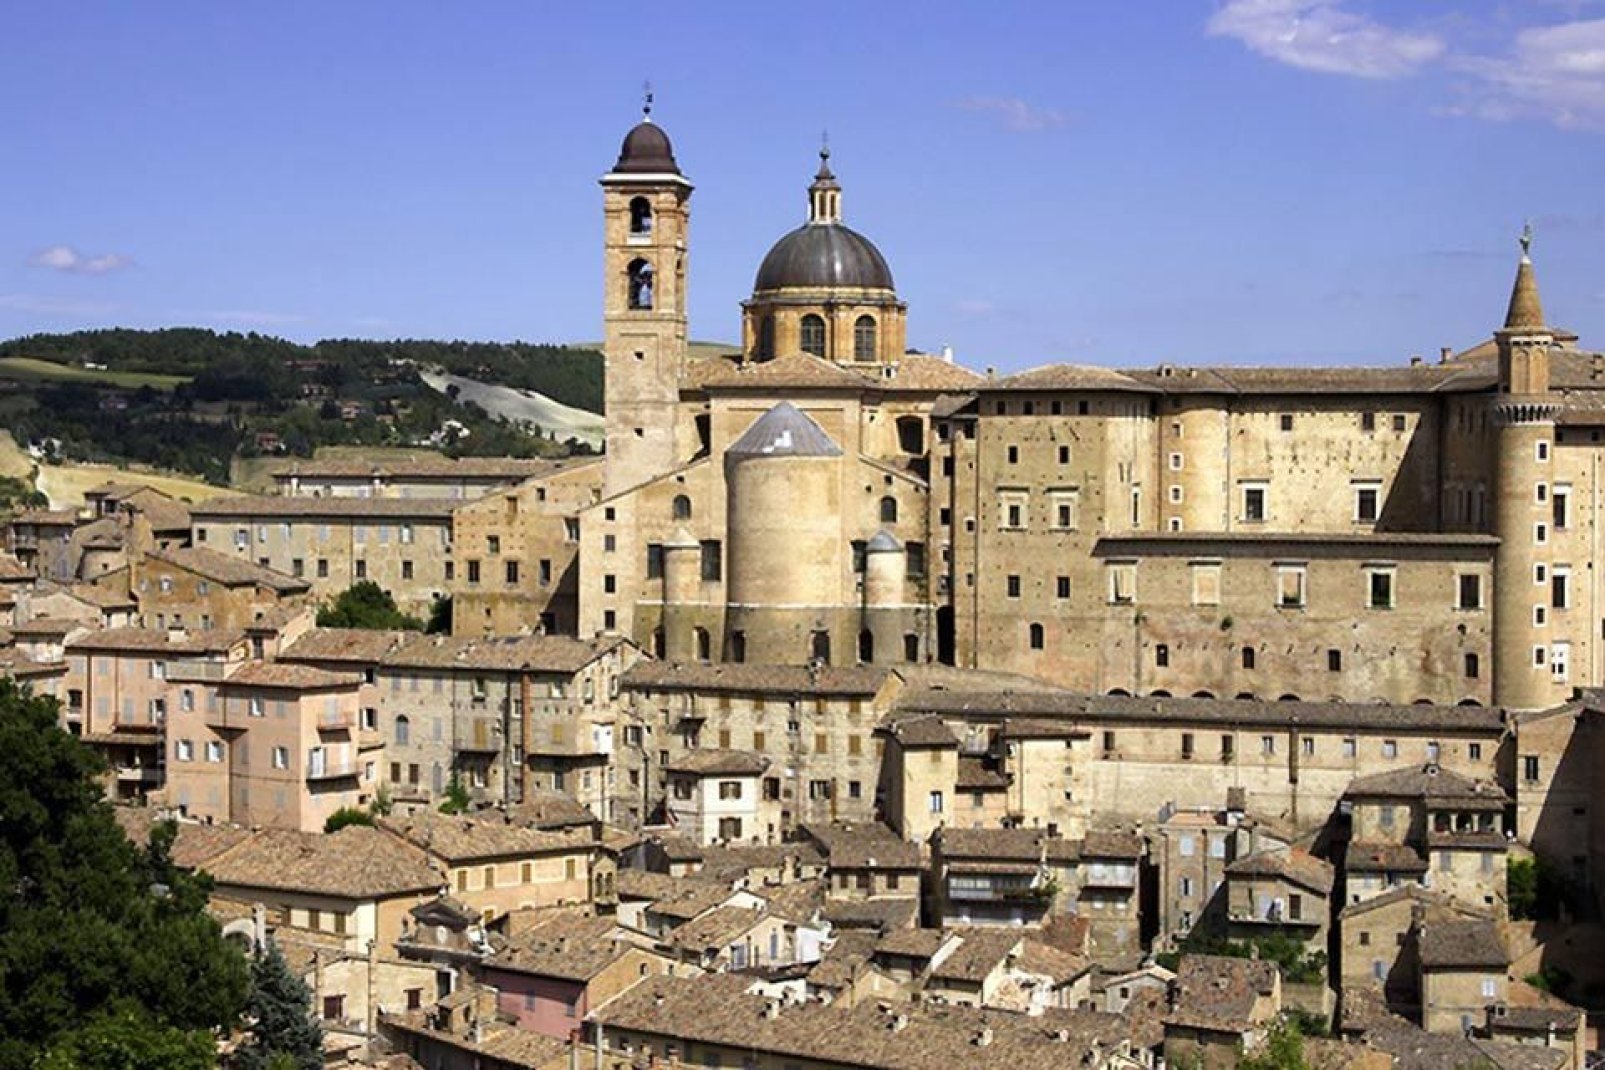 Urbino owes much of its marvellous art to the patronage of the House of Montefeltro, which had one of the most refined nobiliary courtyards in Italy during the Renaissance.